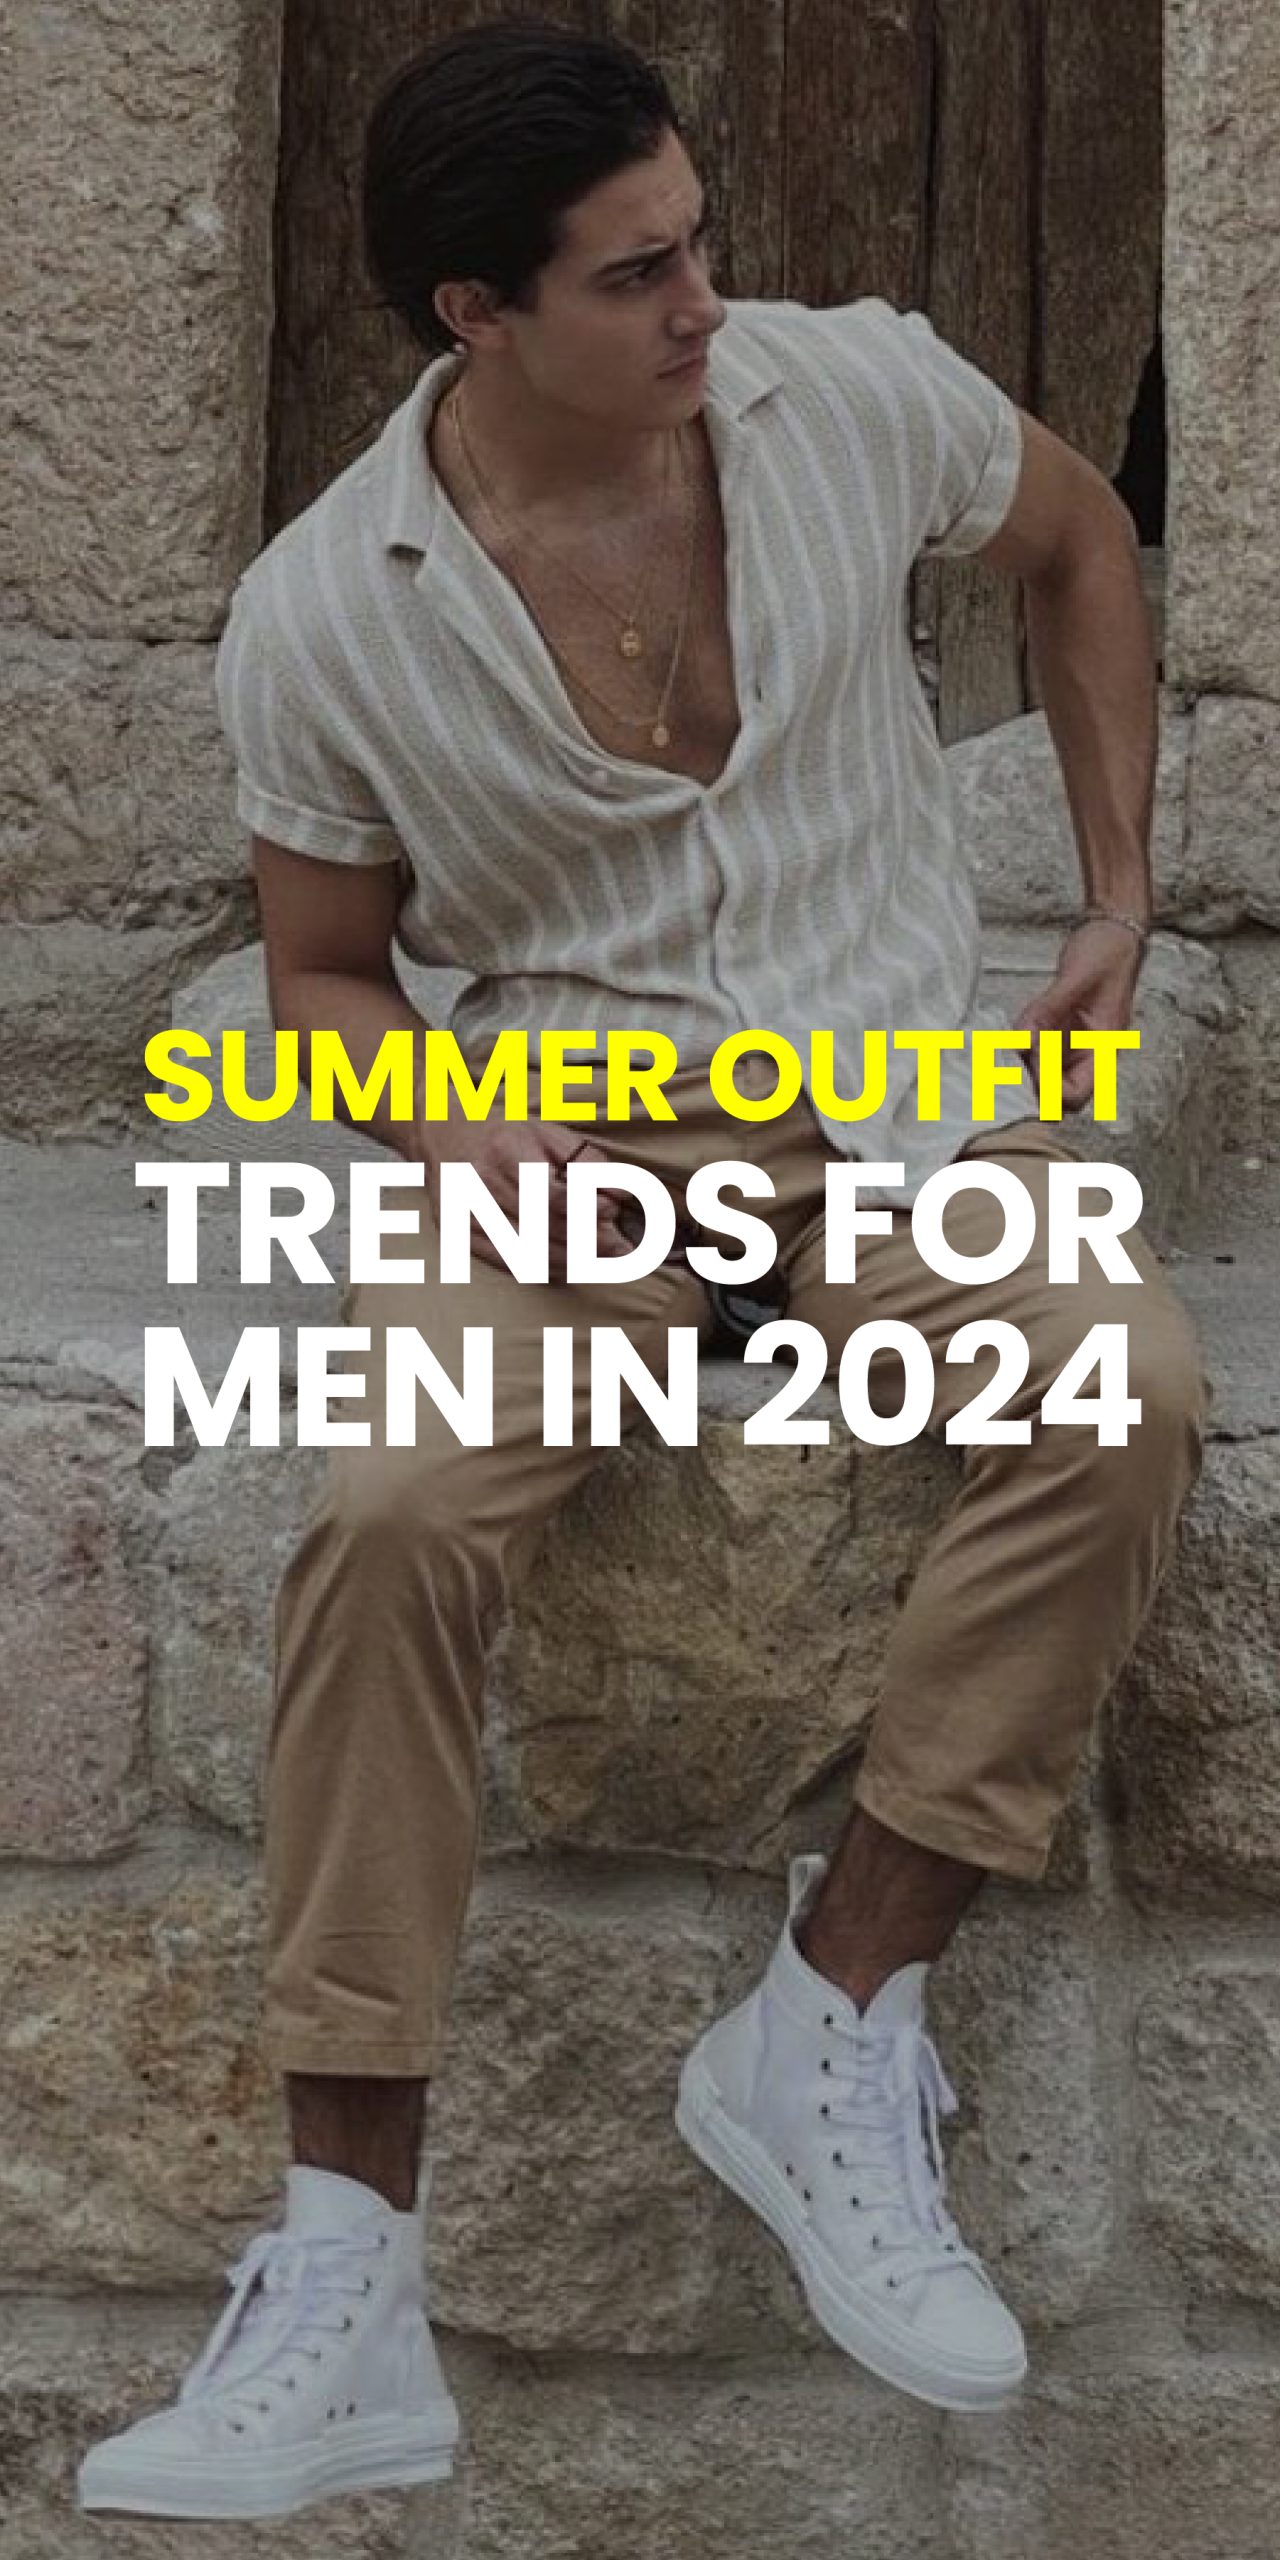 SUMMER OUTFIT TRENDS FOR MEN IN 2024